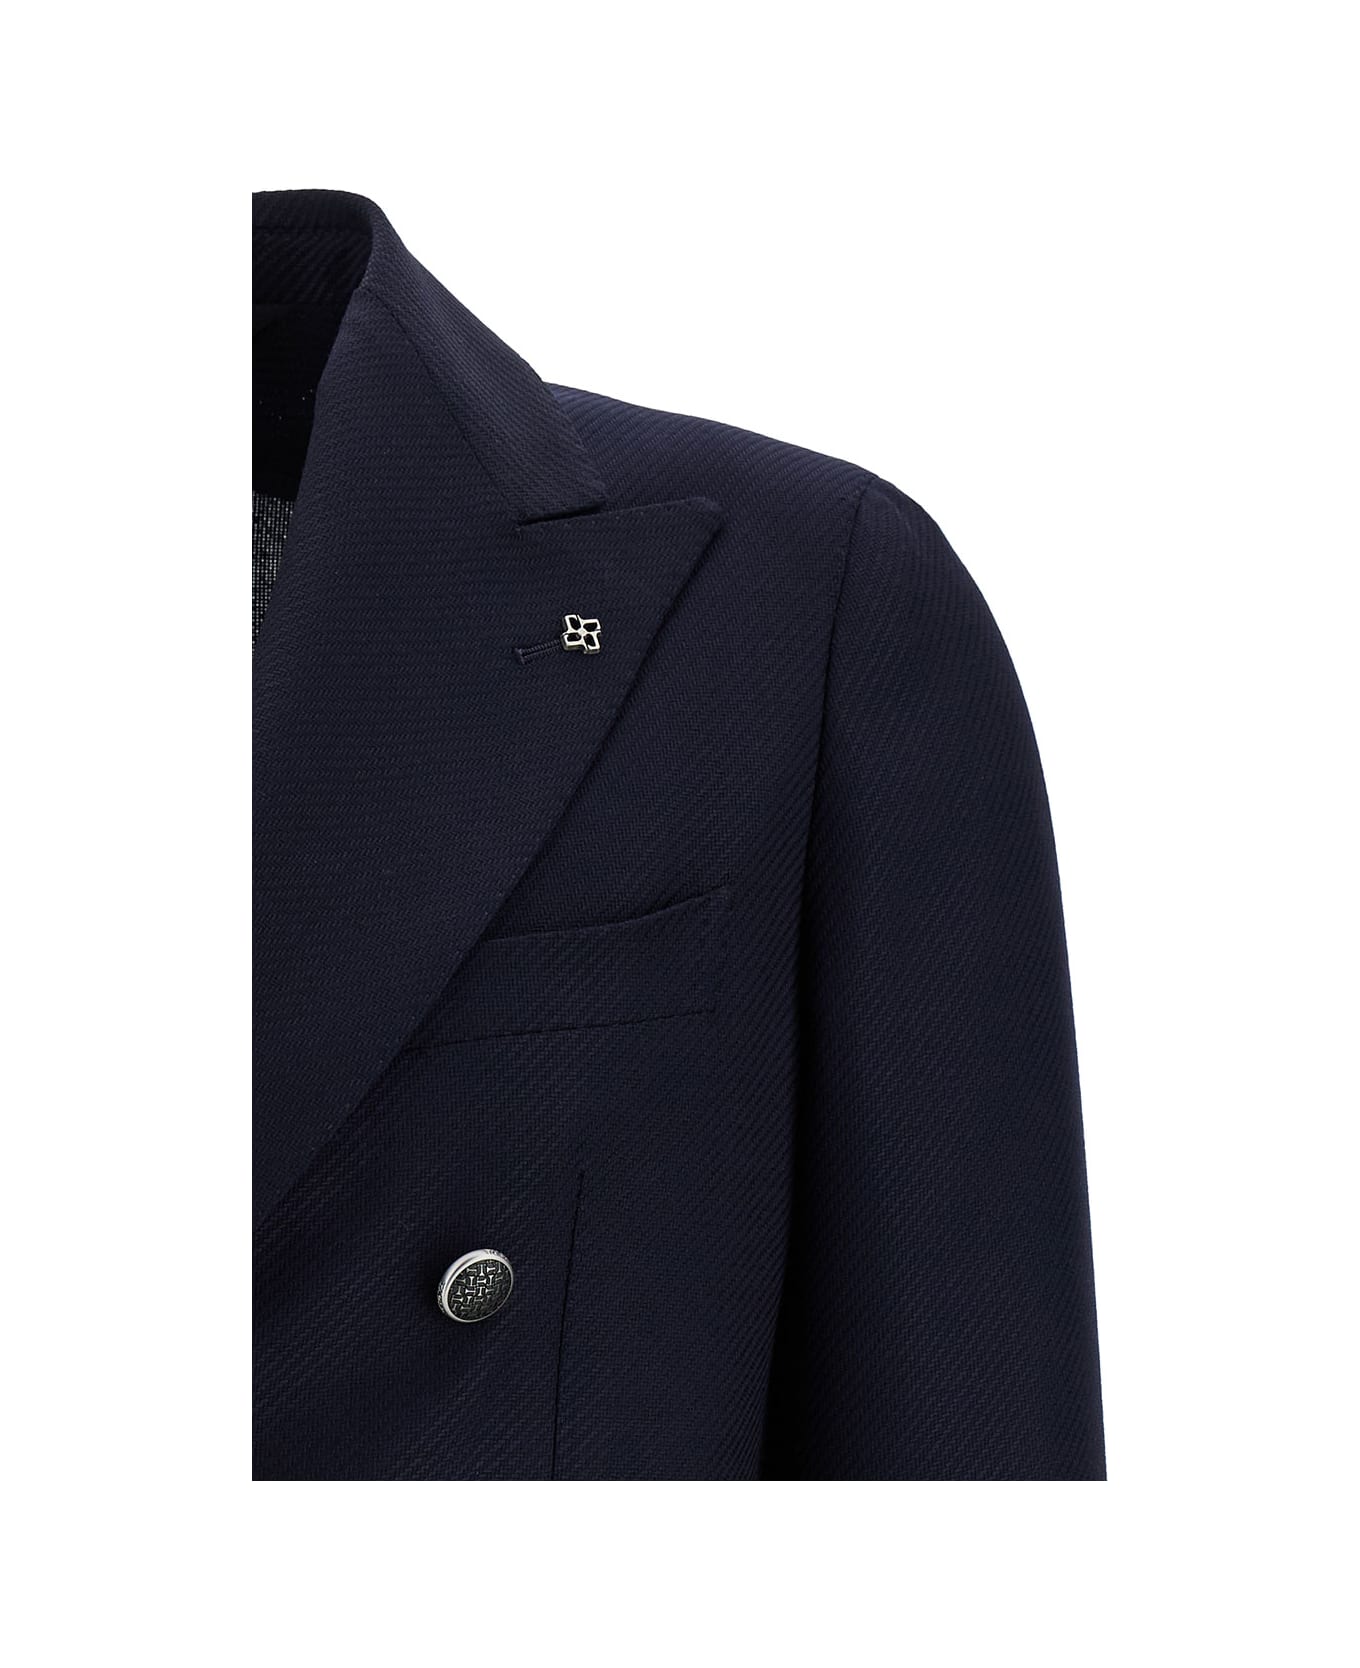 Tagliatore 'montecarlo' Blue Double-breasted Jacket With Silver-colored Buttons In Wool Blend Man - Blu